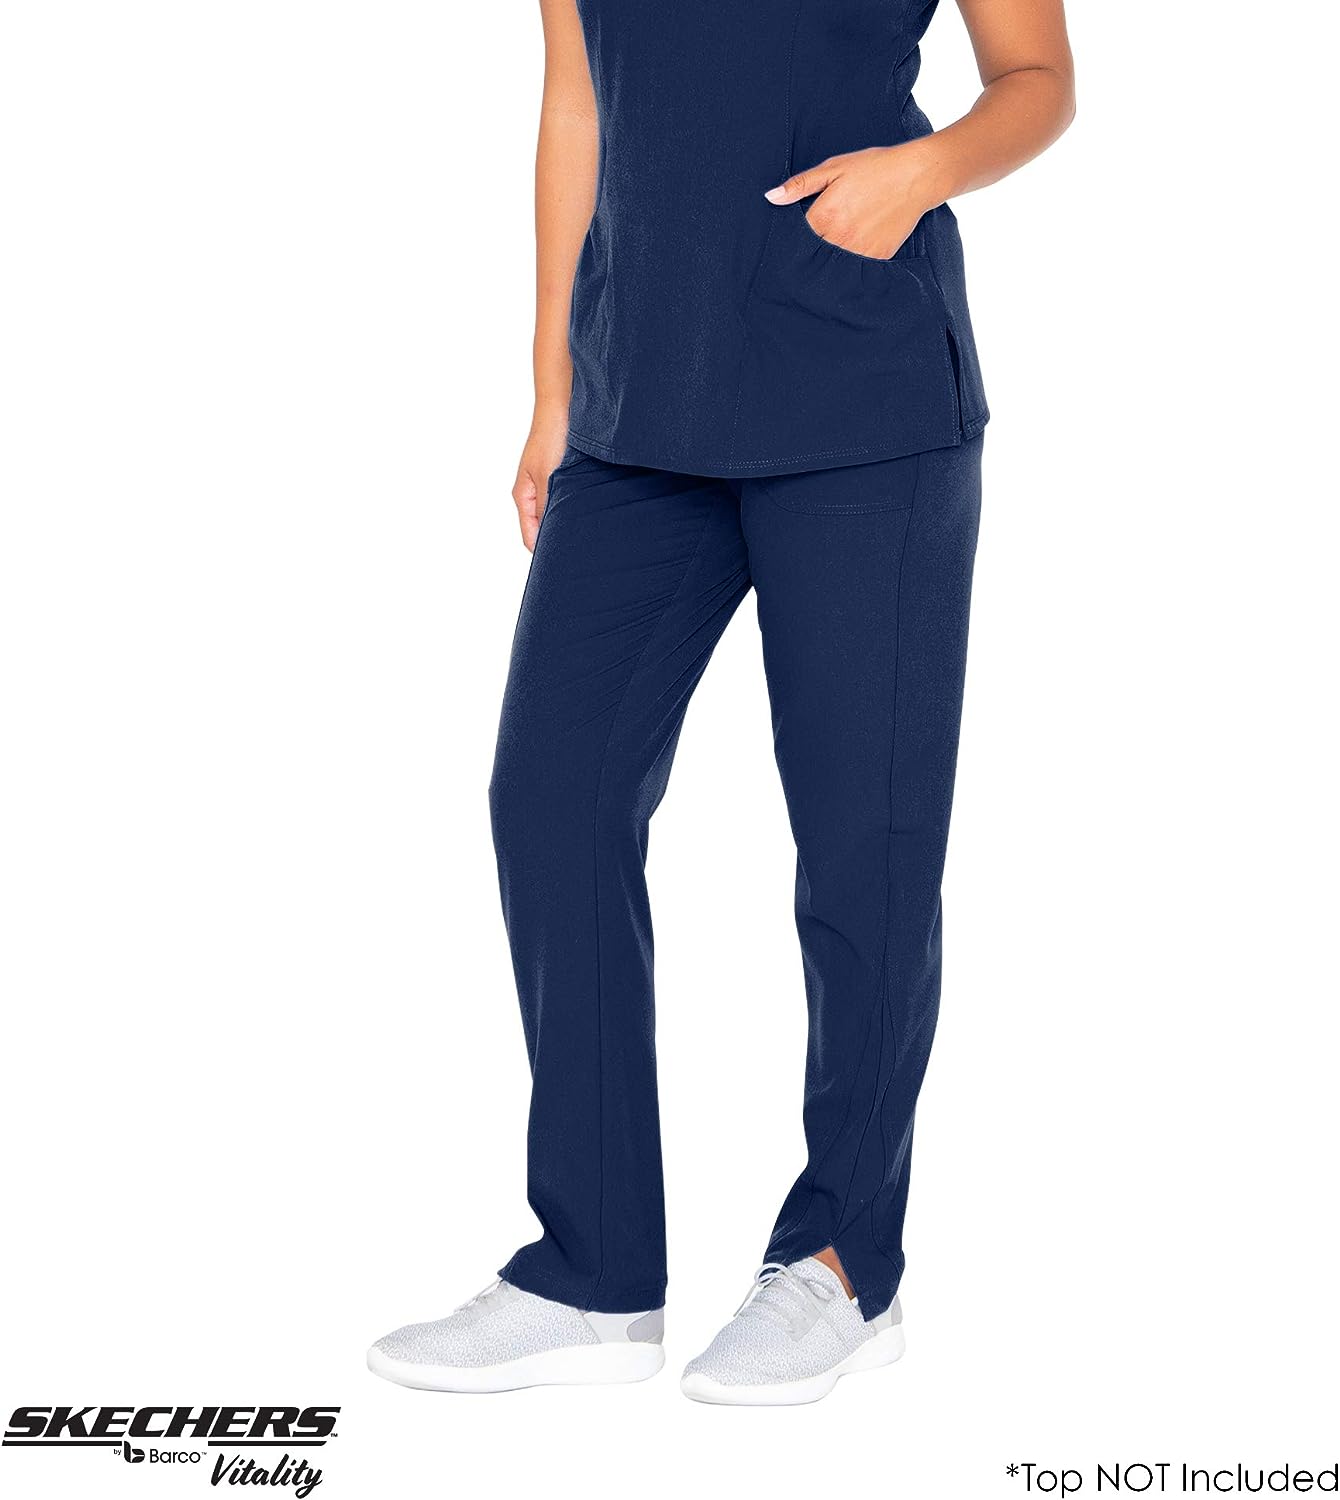 Vitality Charge Scrub Pant for Women review